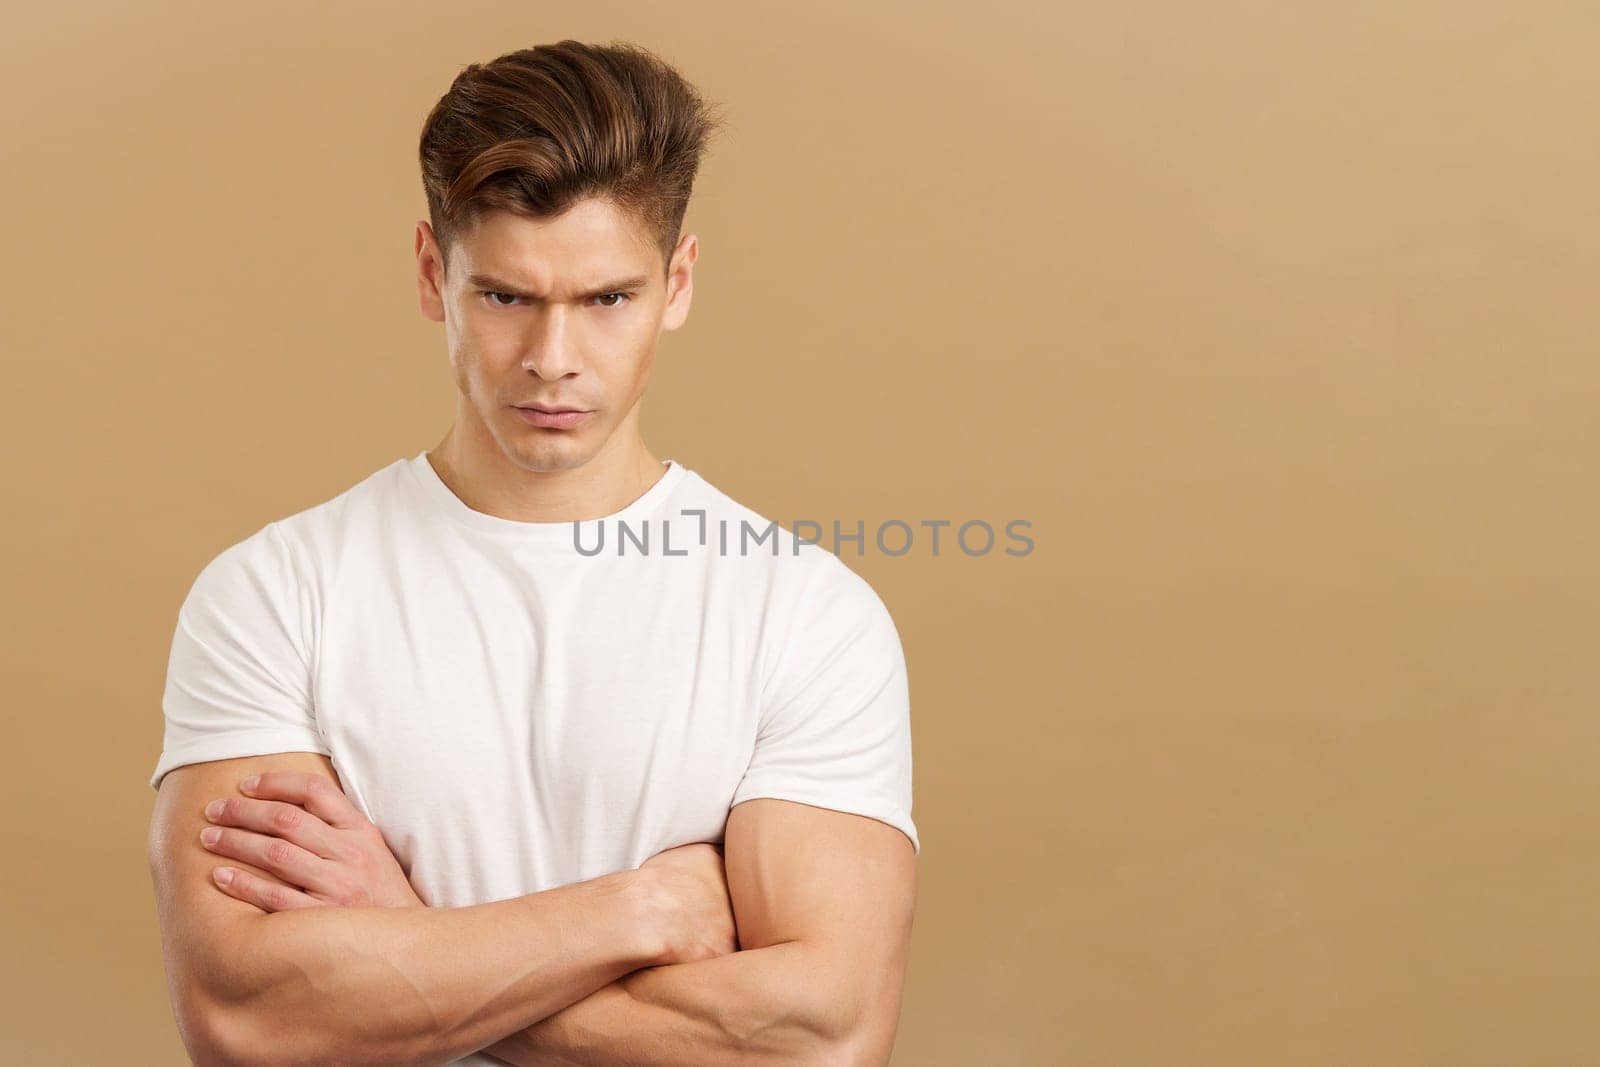 Strong man looking the camera with an angry expression in studio with brown background